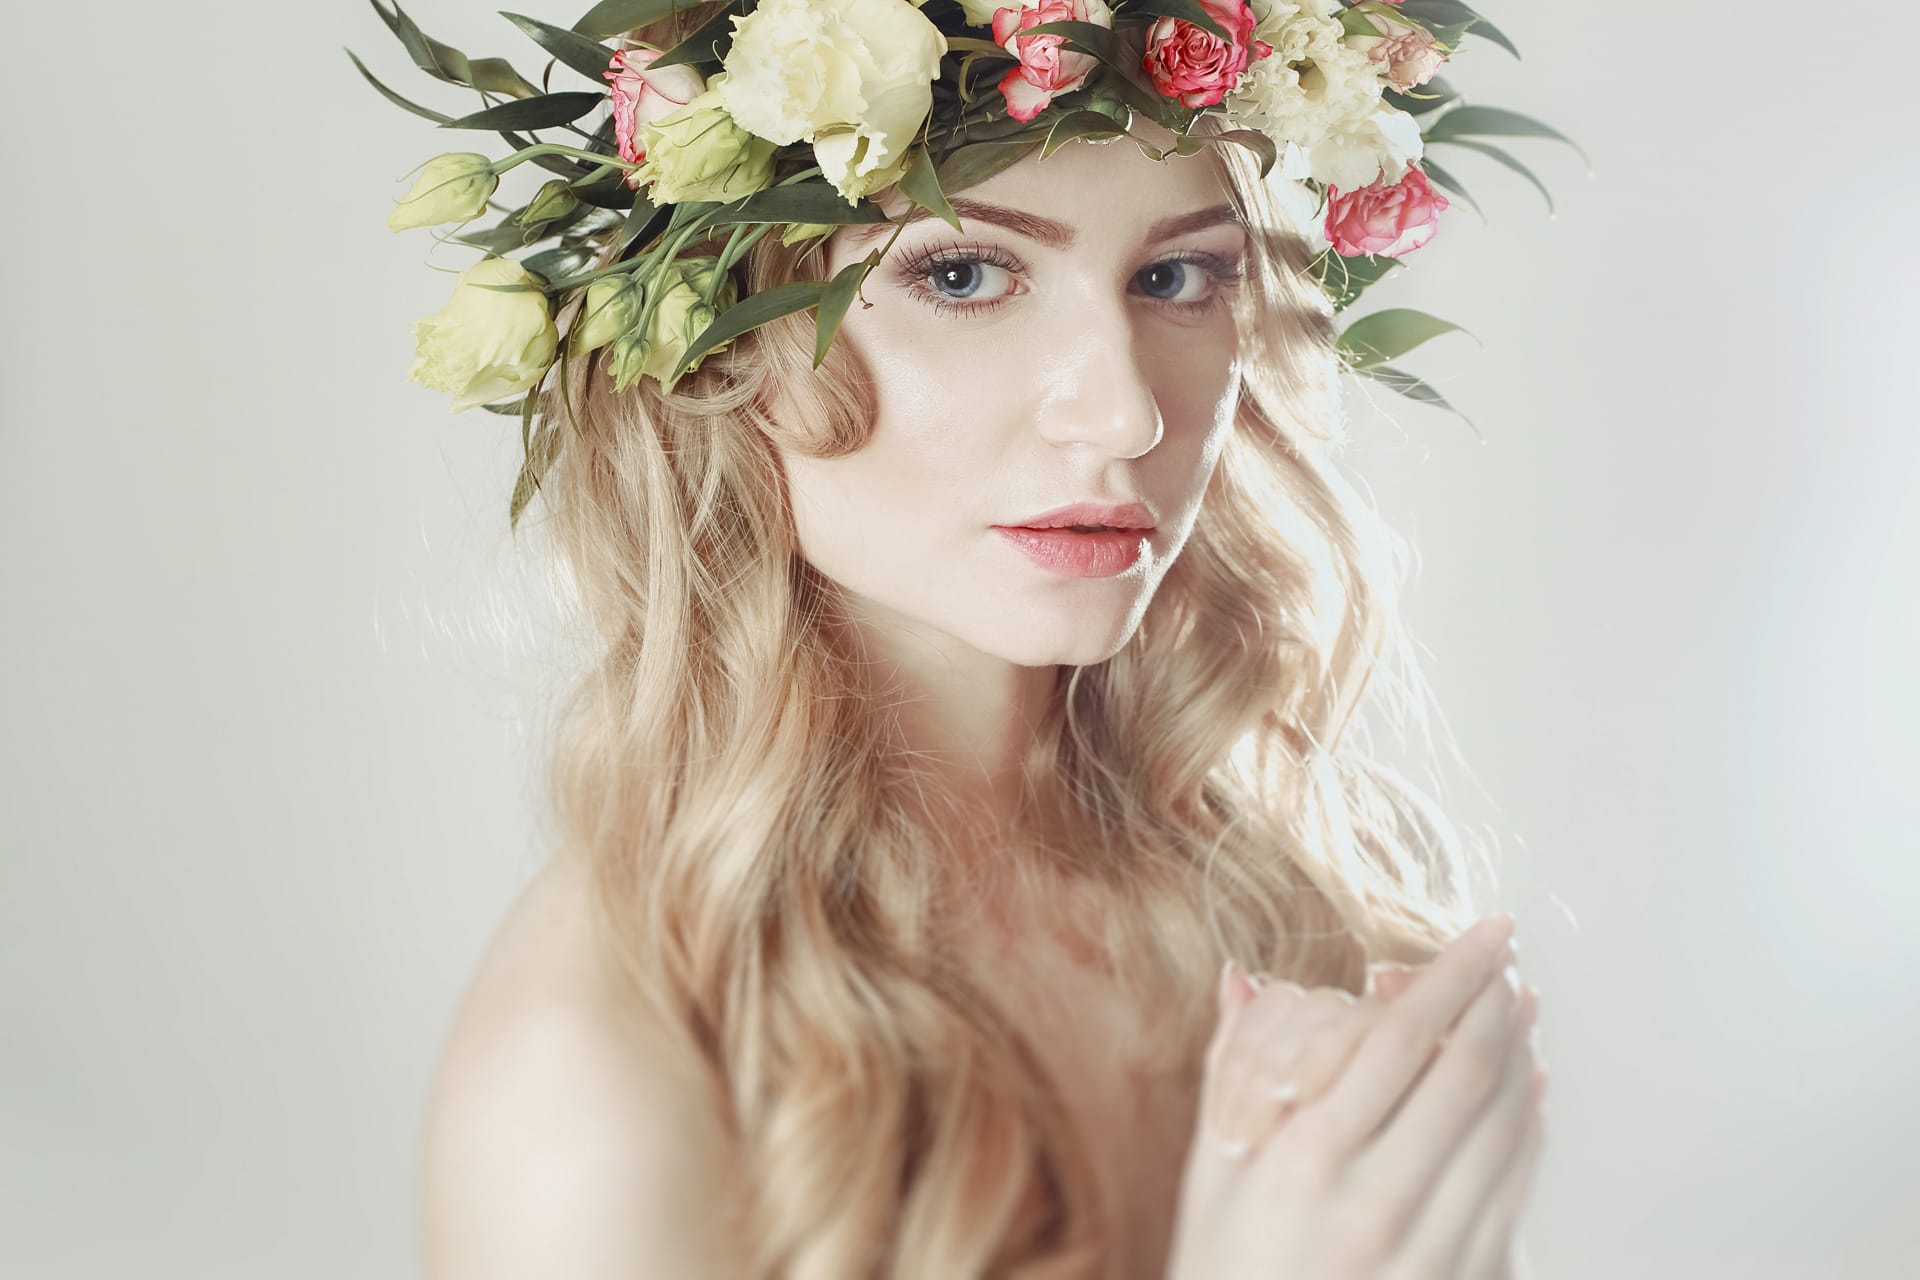 Girl with wreath flowers her head white background